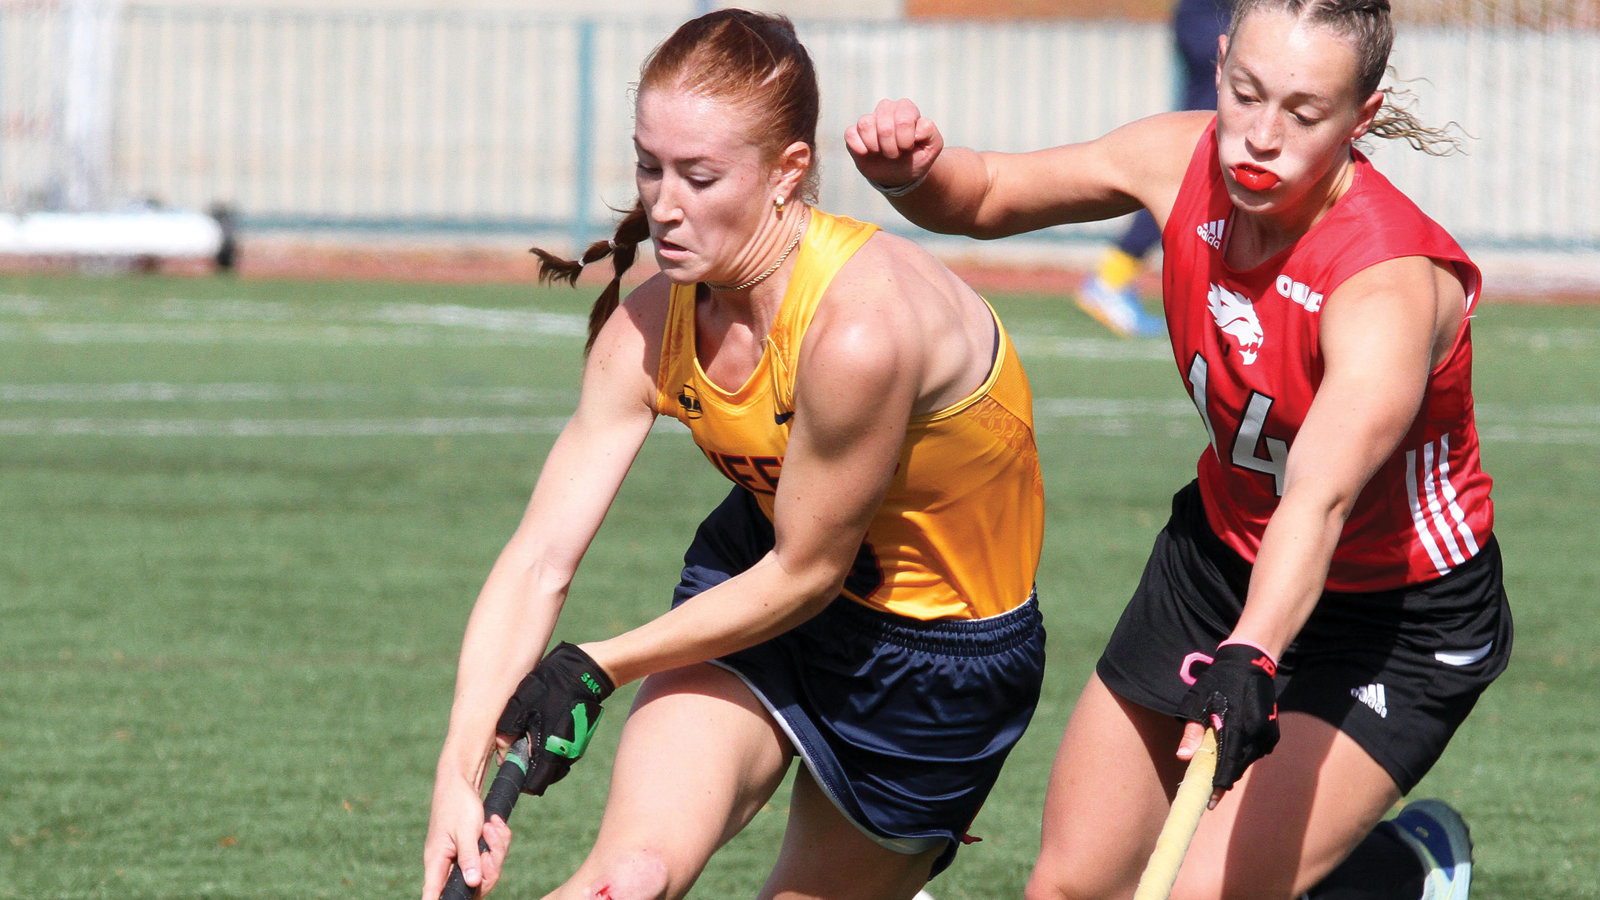 Action photo of Queen's field hockey player running with the ball on her stick as an opposing player tries to defend her